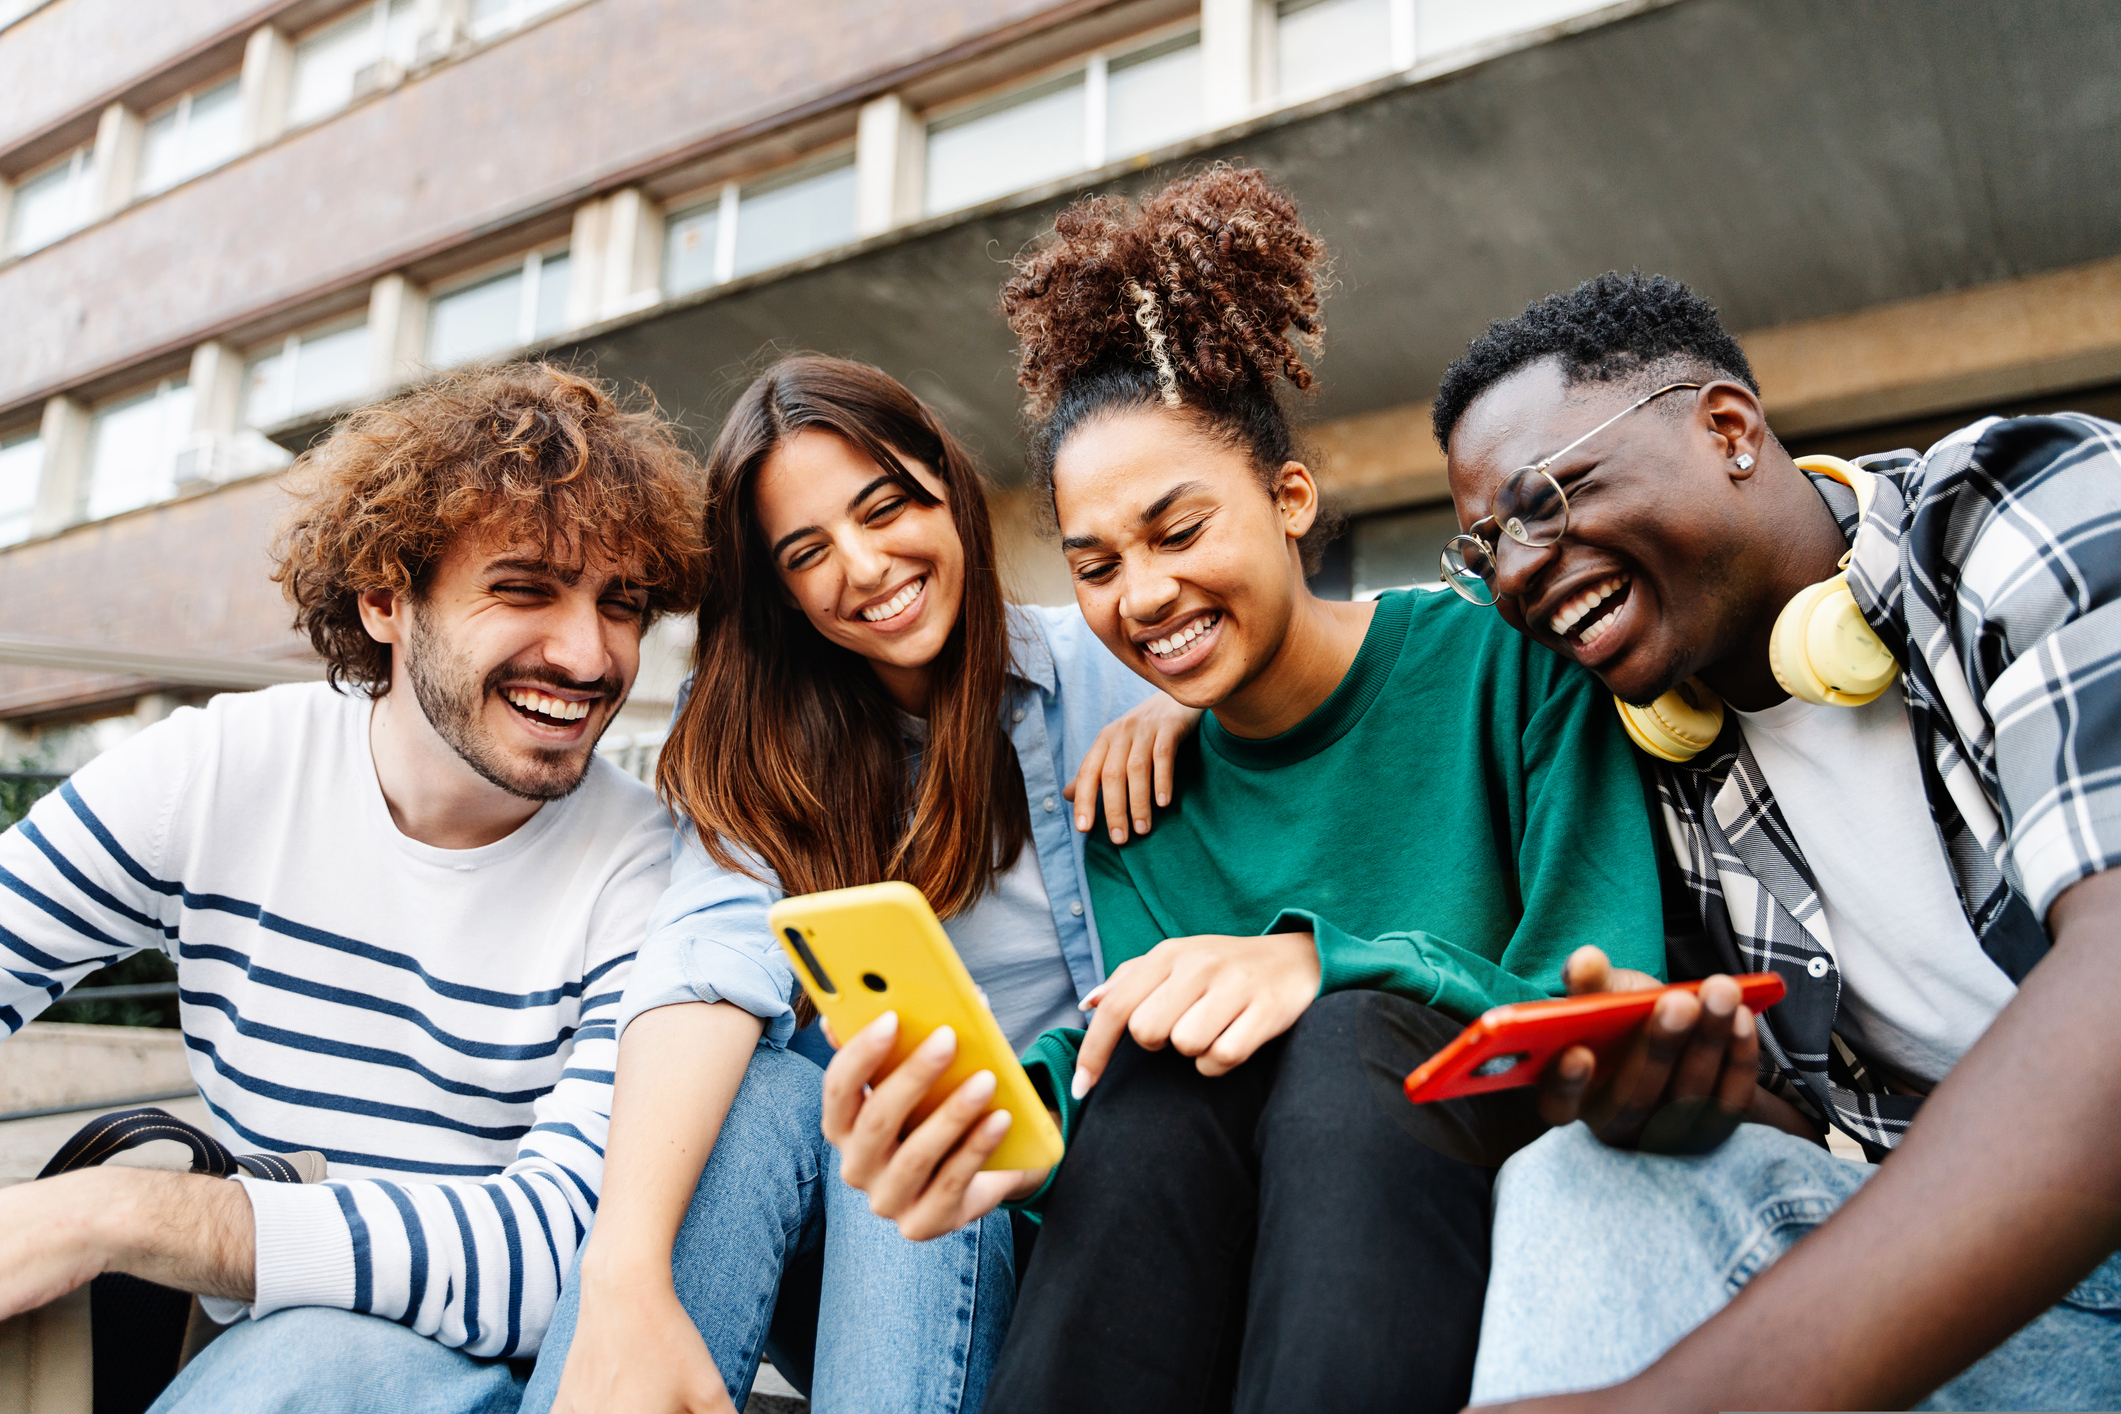 Group of students looking at phone smiling